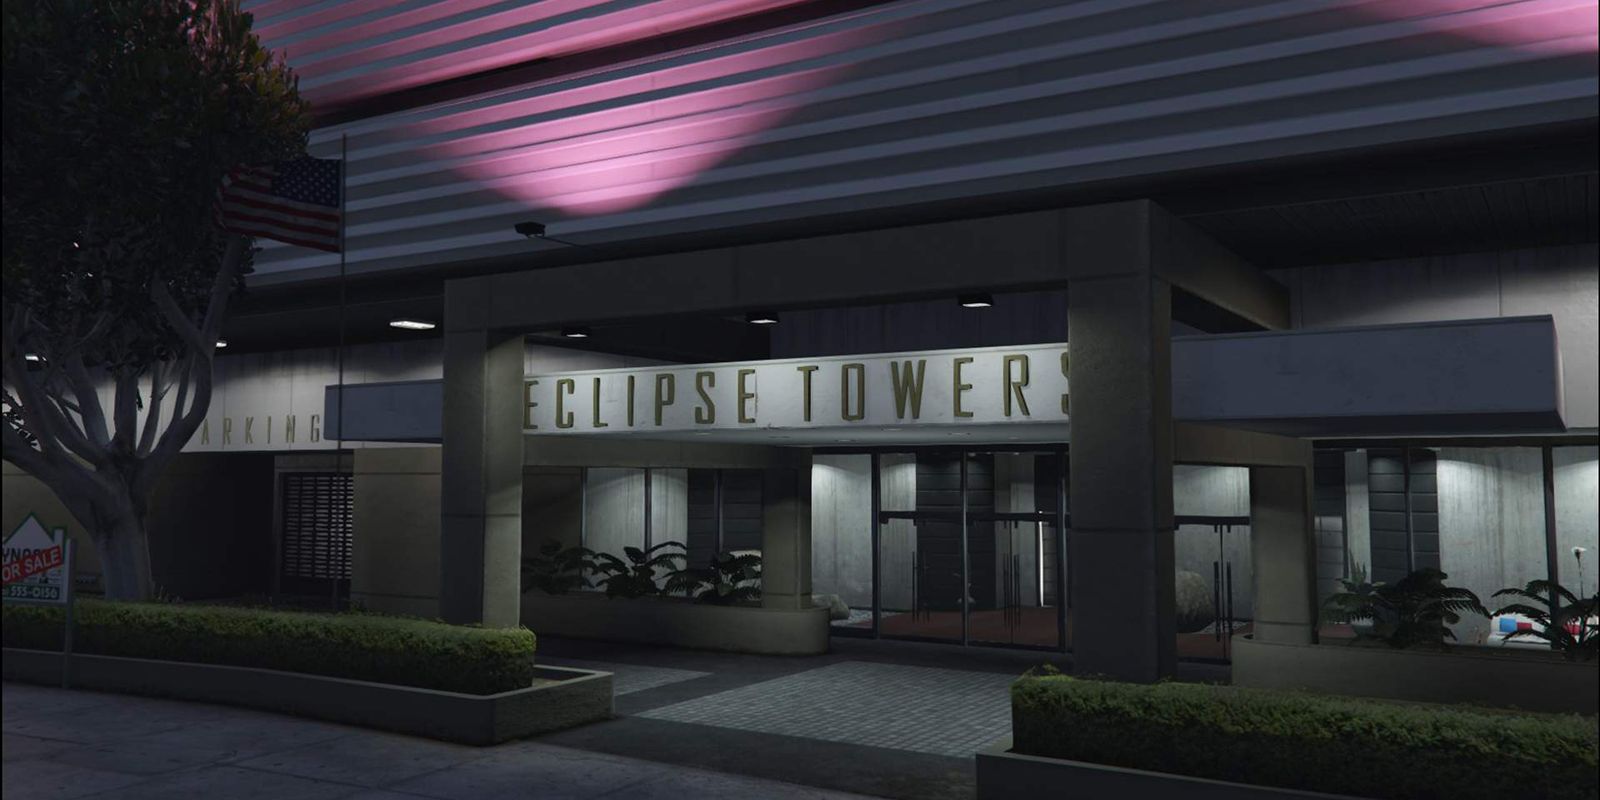 GTA Online eclipse tower front